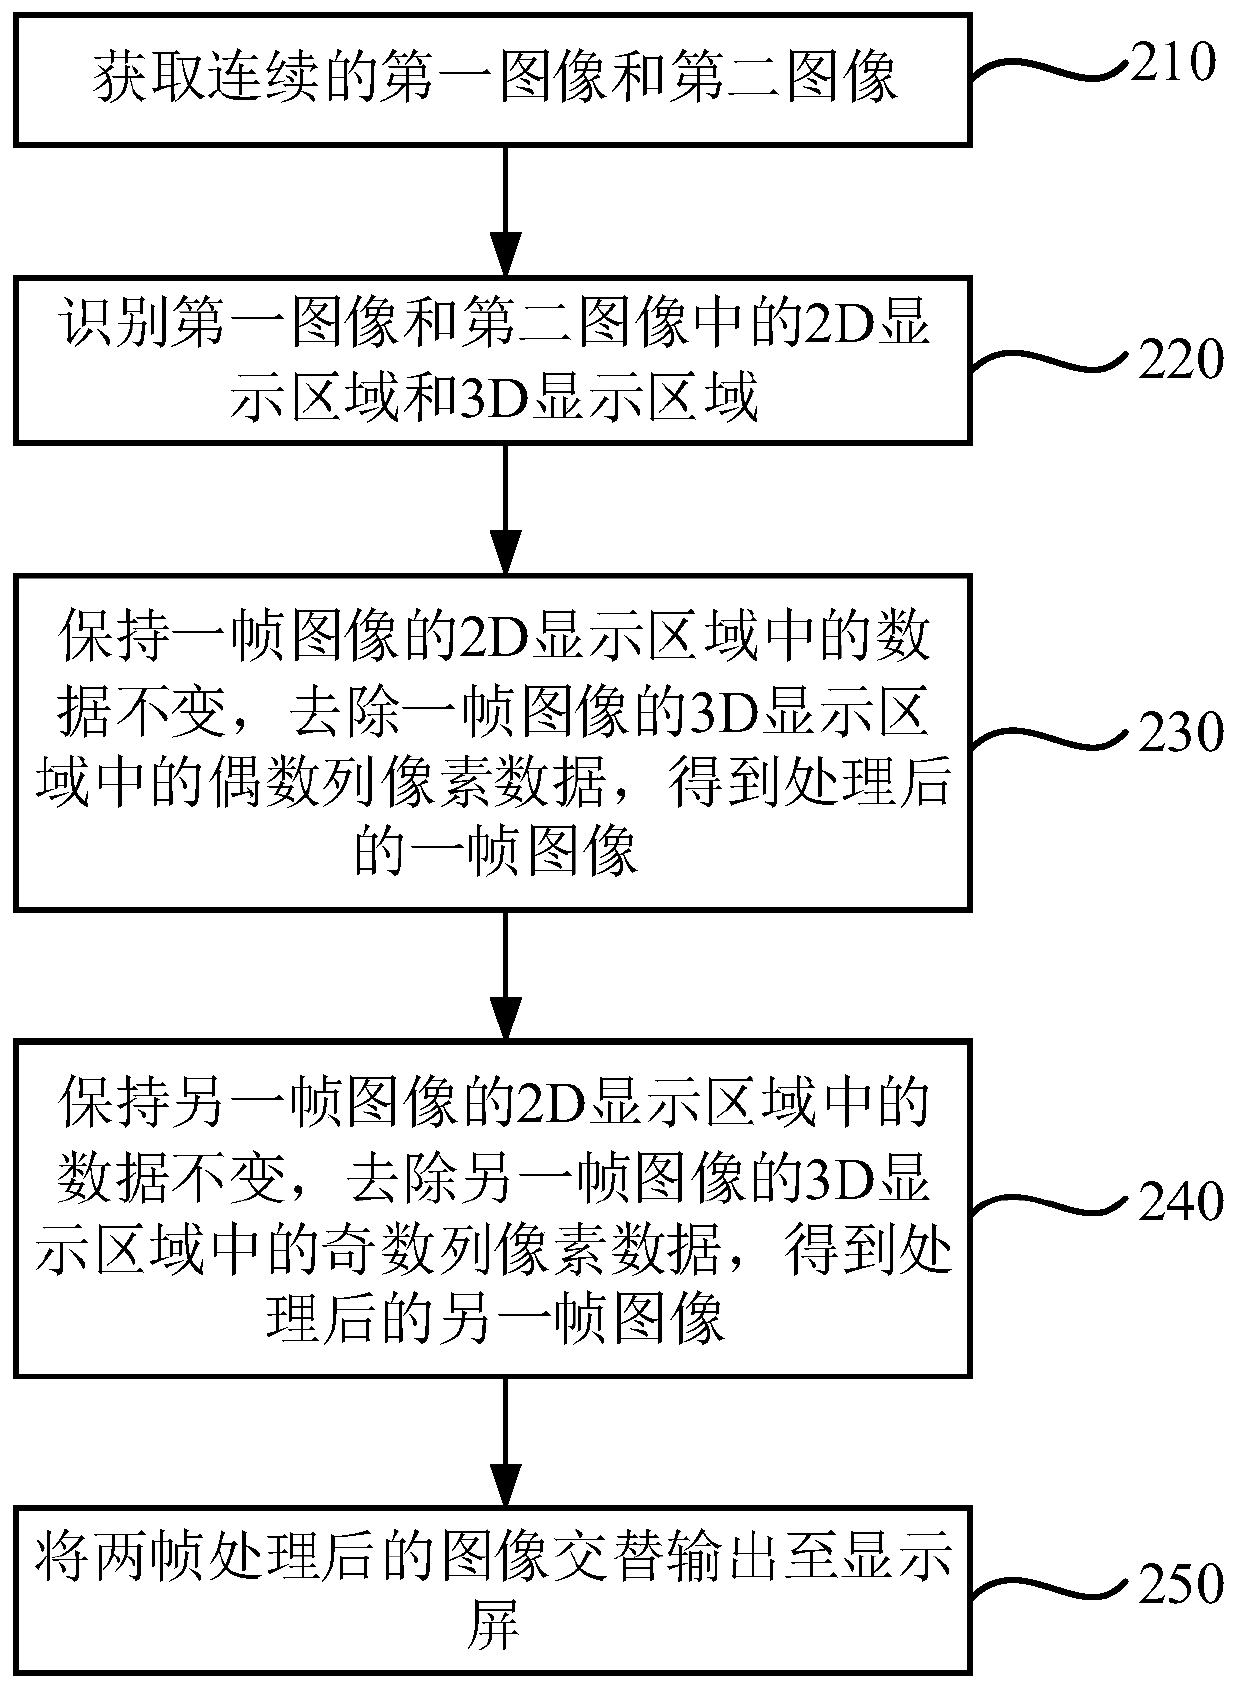 Image processing method, device and system, and display device